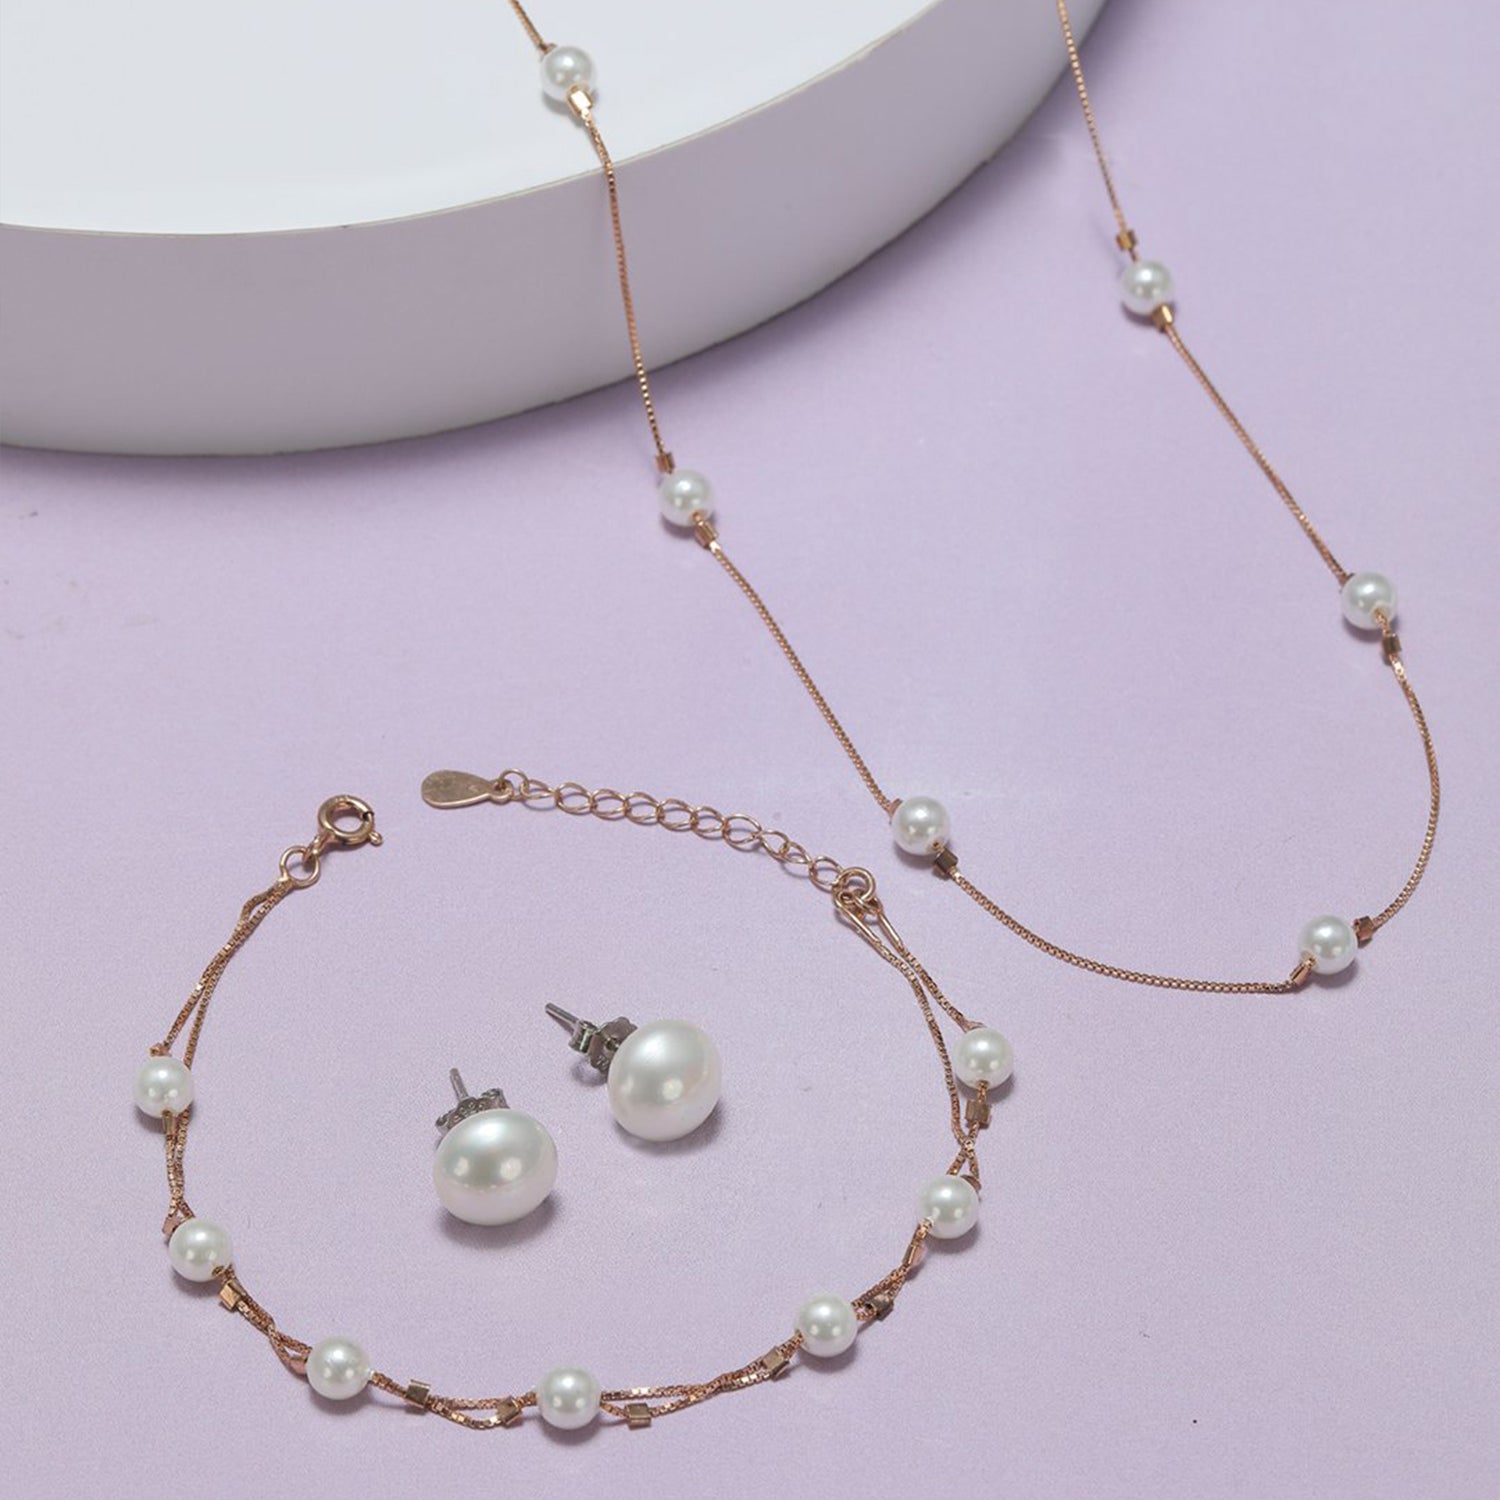 Stunning 925 Silver Freshwater Pearl Trio